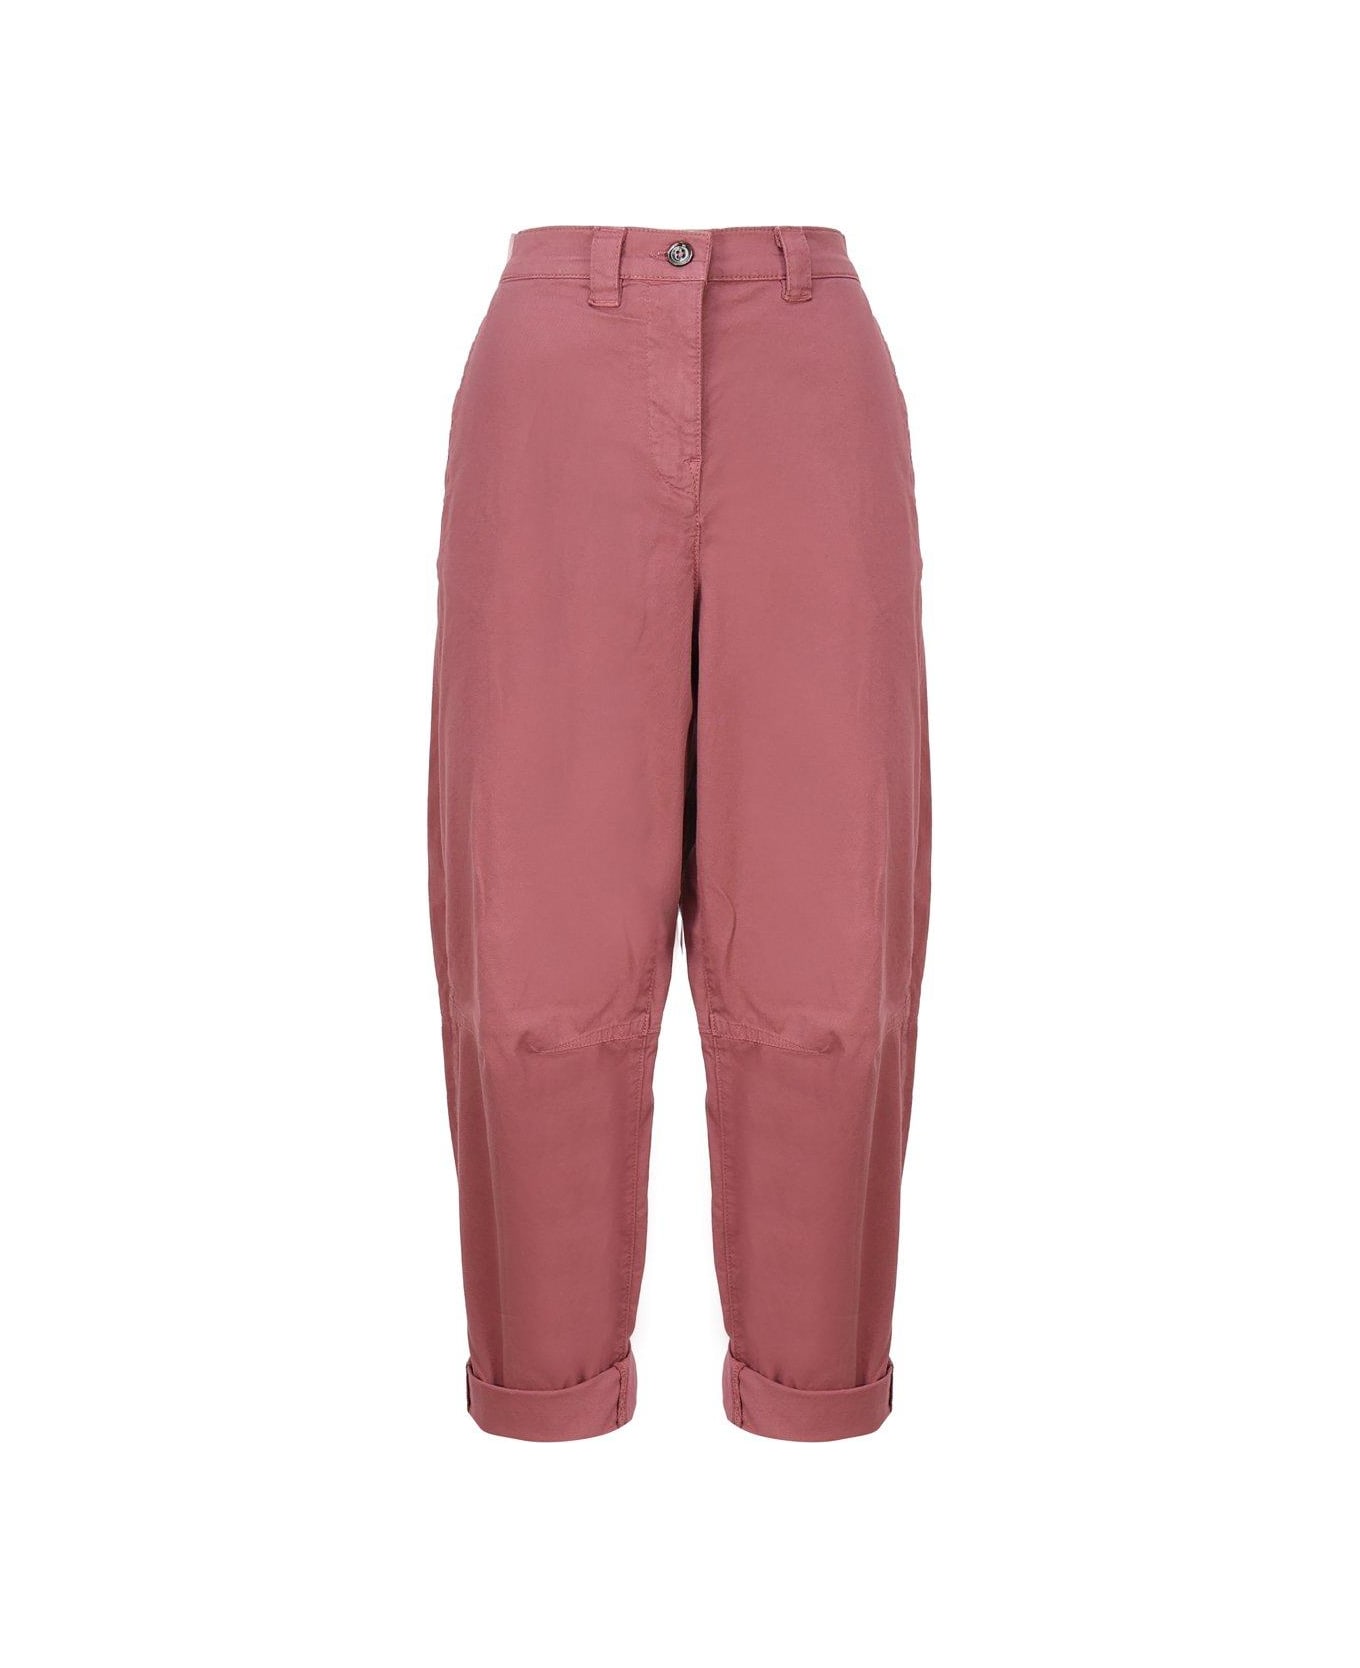 Pinko Carrot-fit Trousers - Pink ボトムス